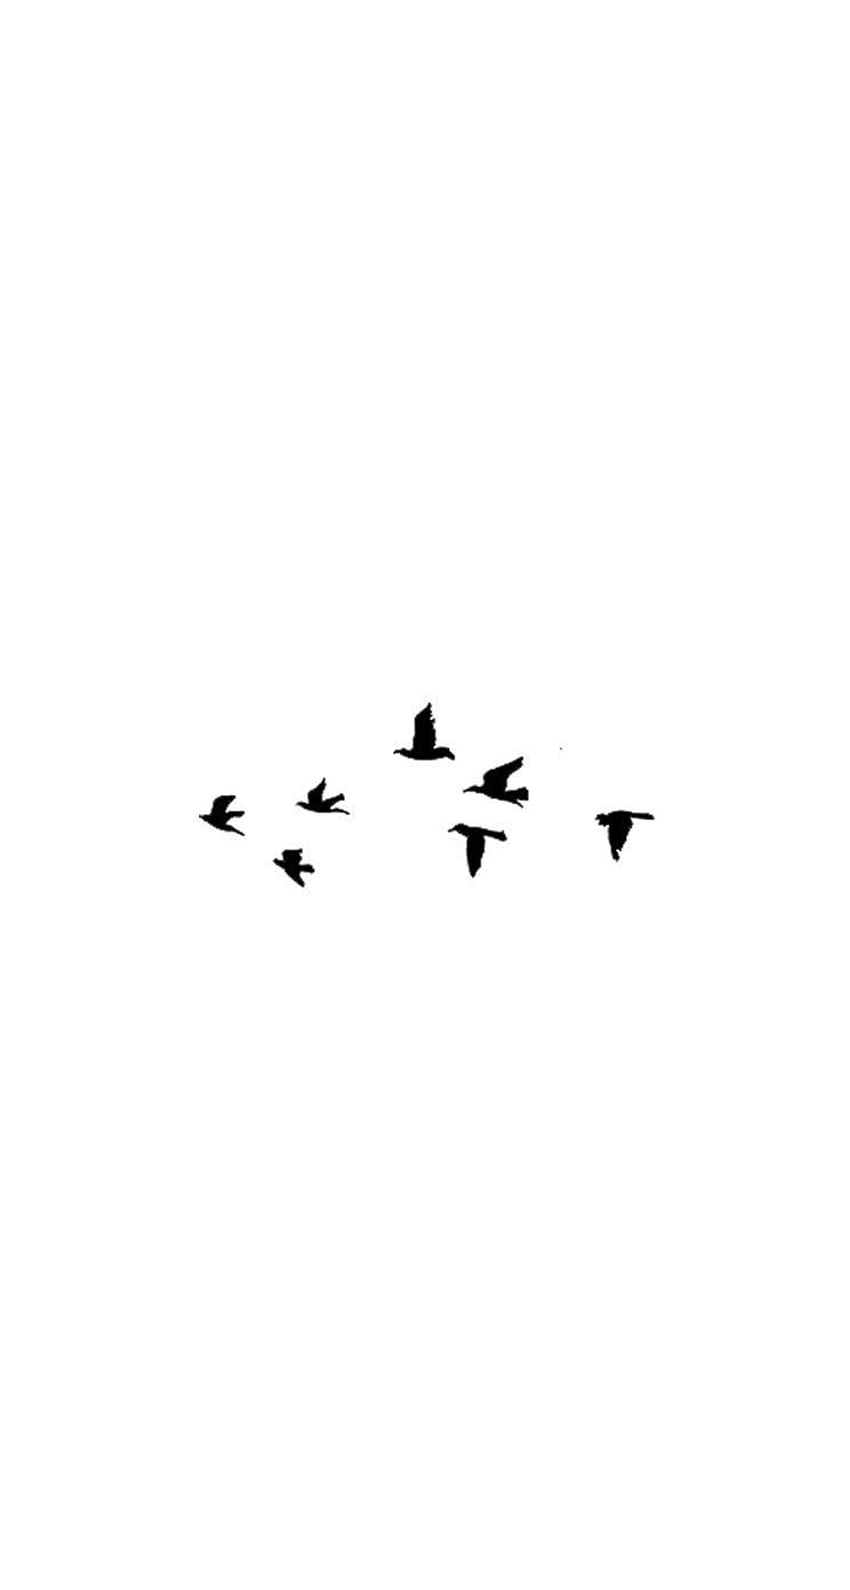 Silhouette of a flock of birds flying in the sky - 